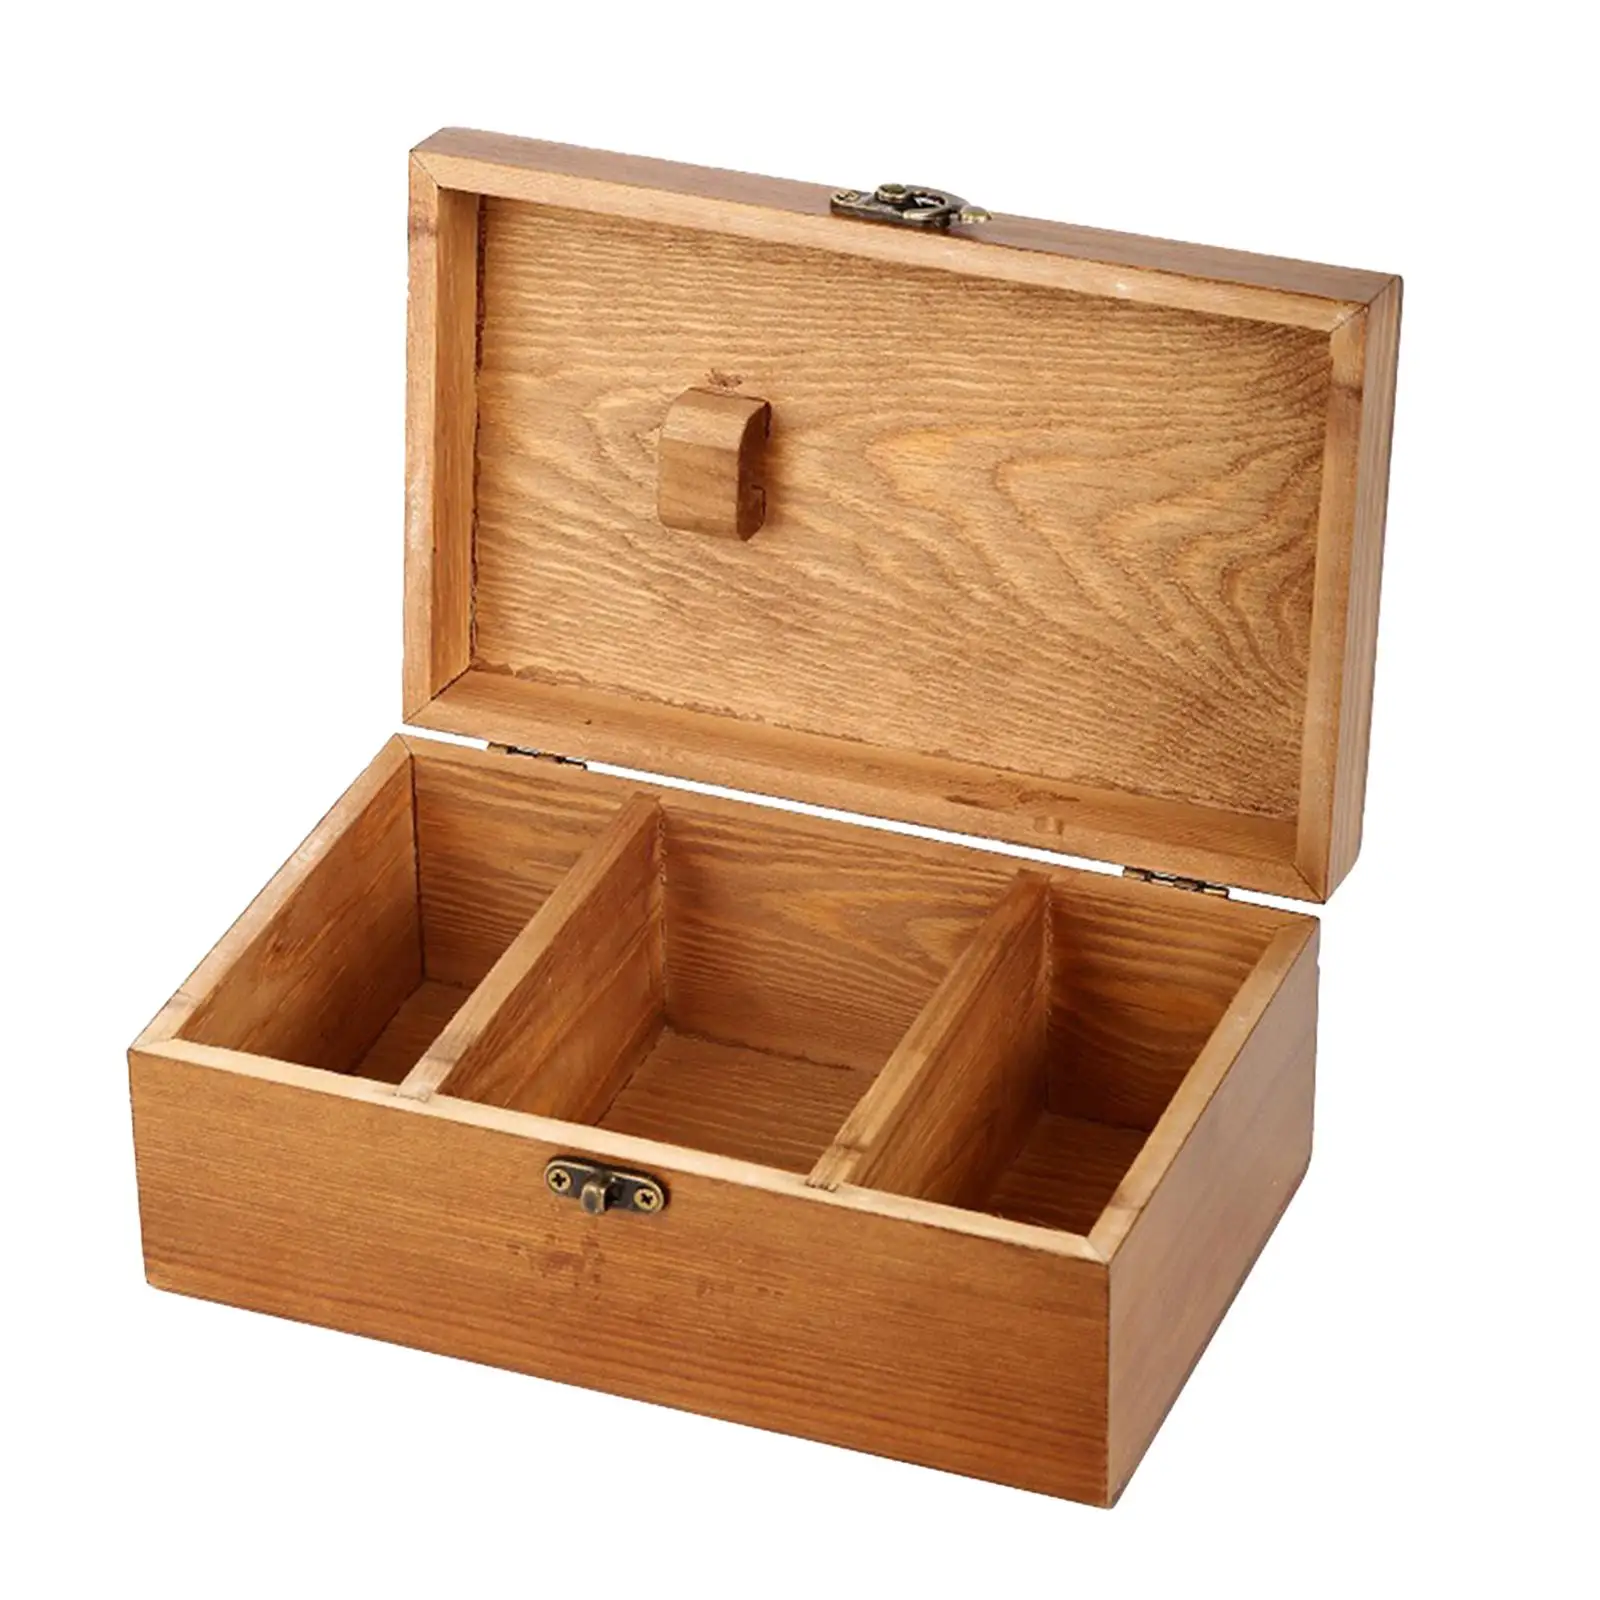 Wooden Sewing Box Empty Box DIY for Yarn Needle Buttons Wood Sewing Basket